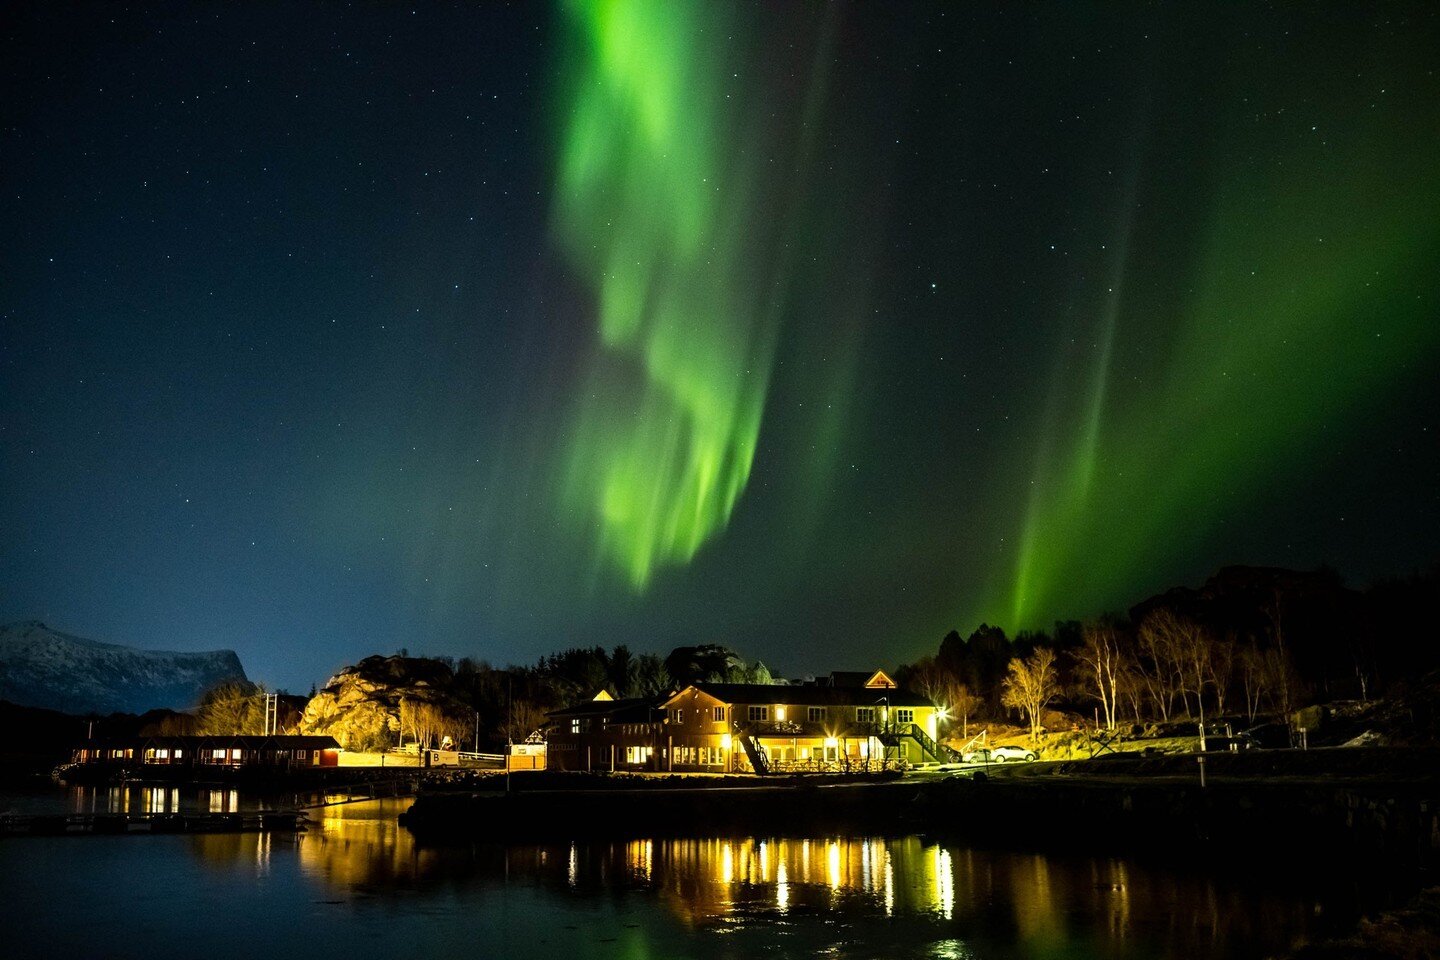 The Northern Lights have been putting on an incredible show over the past few weeks here at Sk&aring;rungen. The sky has been alive with vibrant colors, dancing and swirling in the darkness.⁠
⁠
It's an experience that words simply can't do justice to